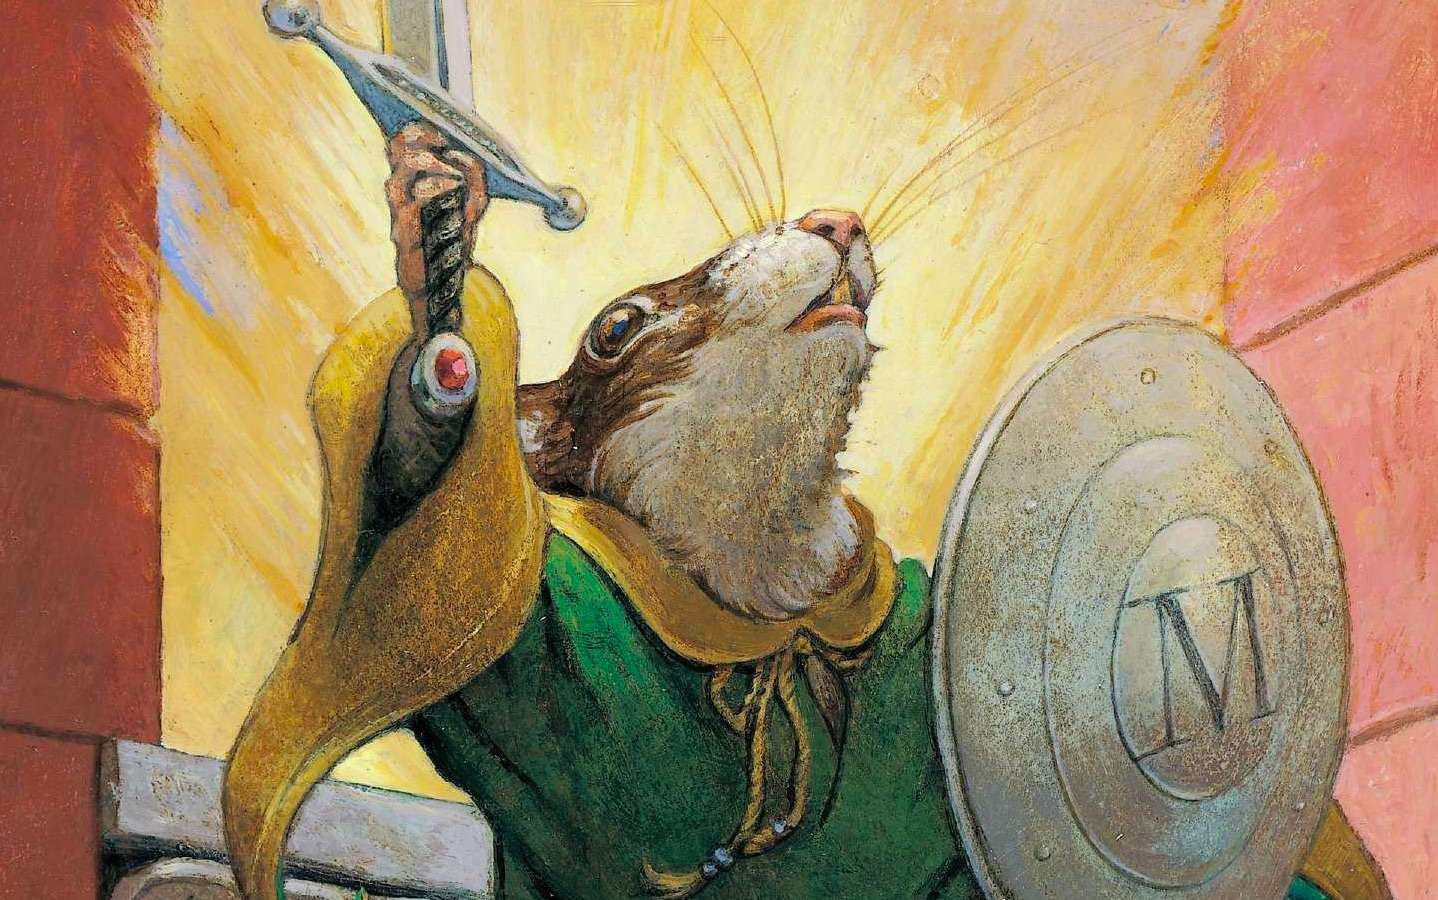 Redwall Book 1 cover